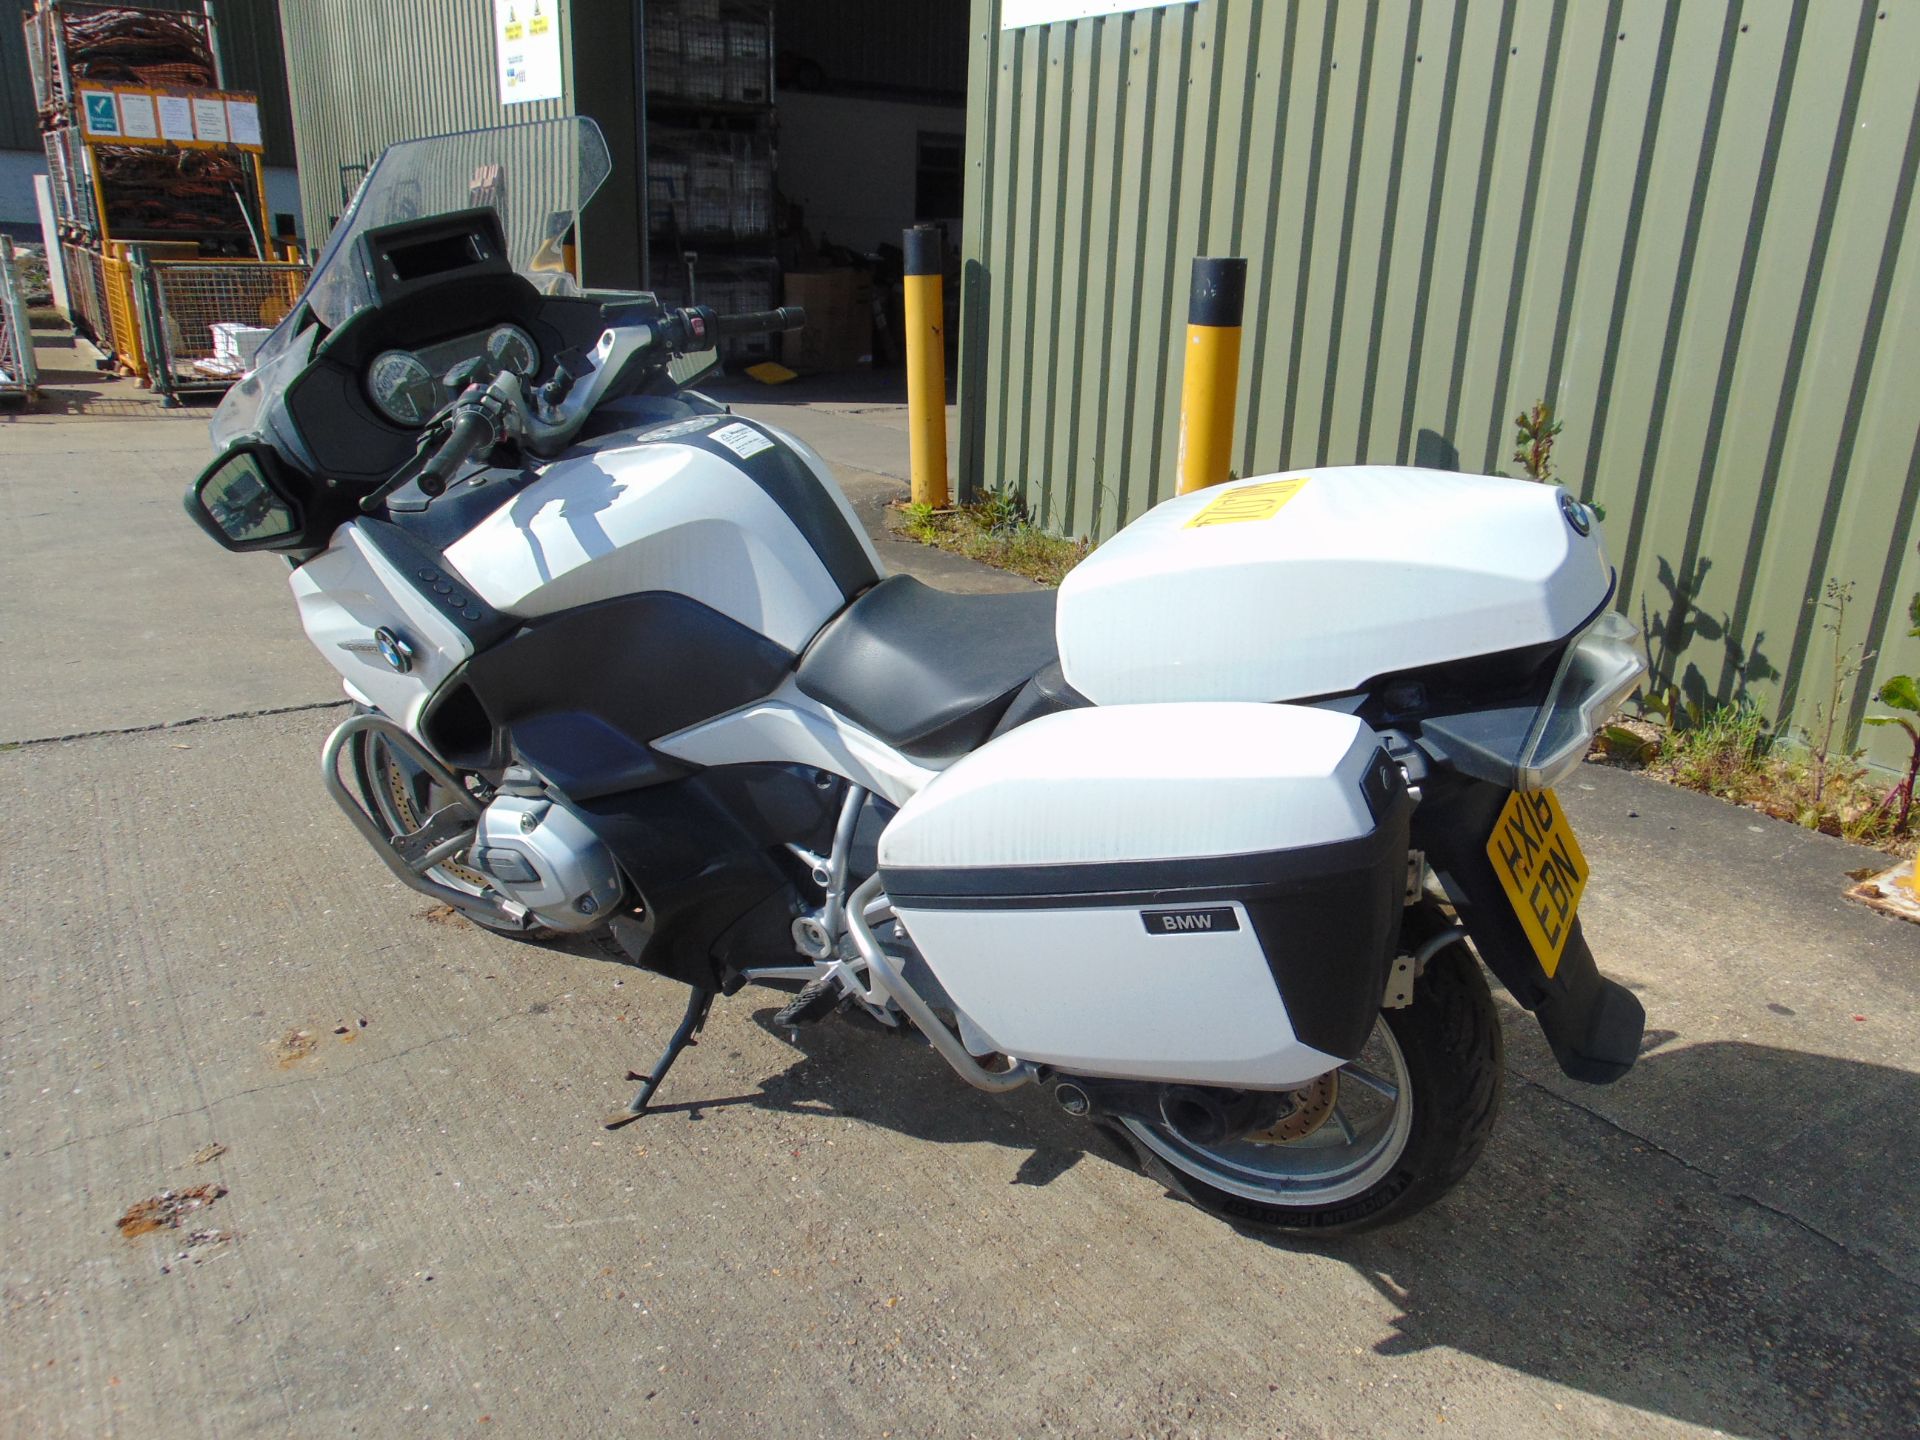 2018 BMW R1200RT Motorbike 50,000 miles from UK Police - Image 7 of 38